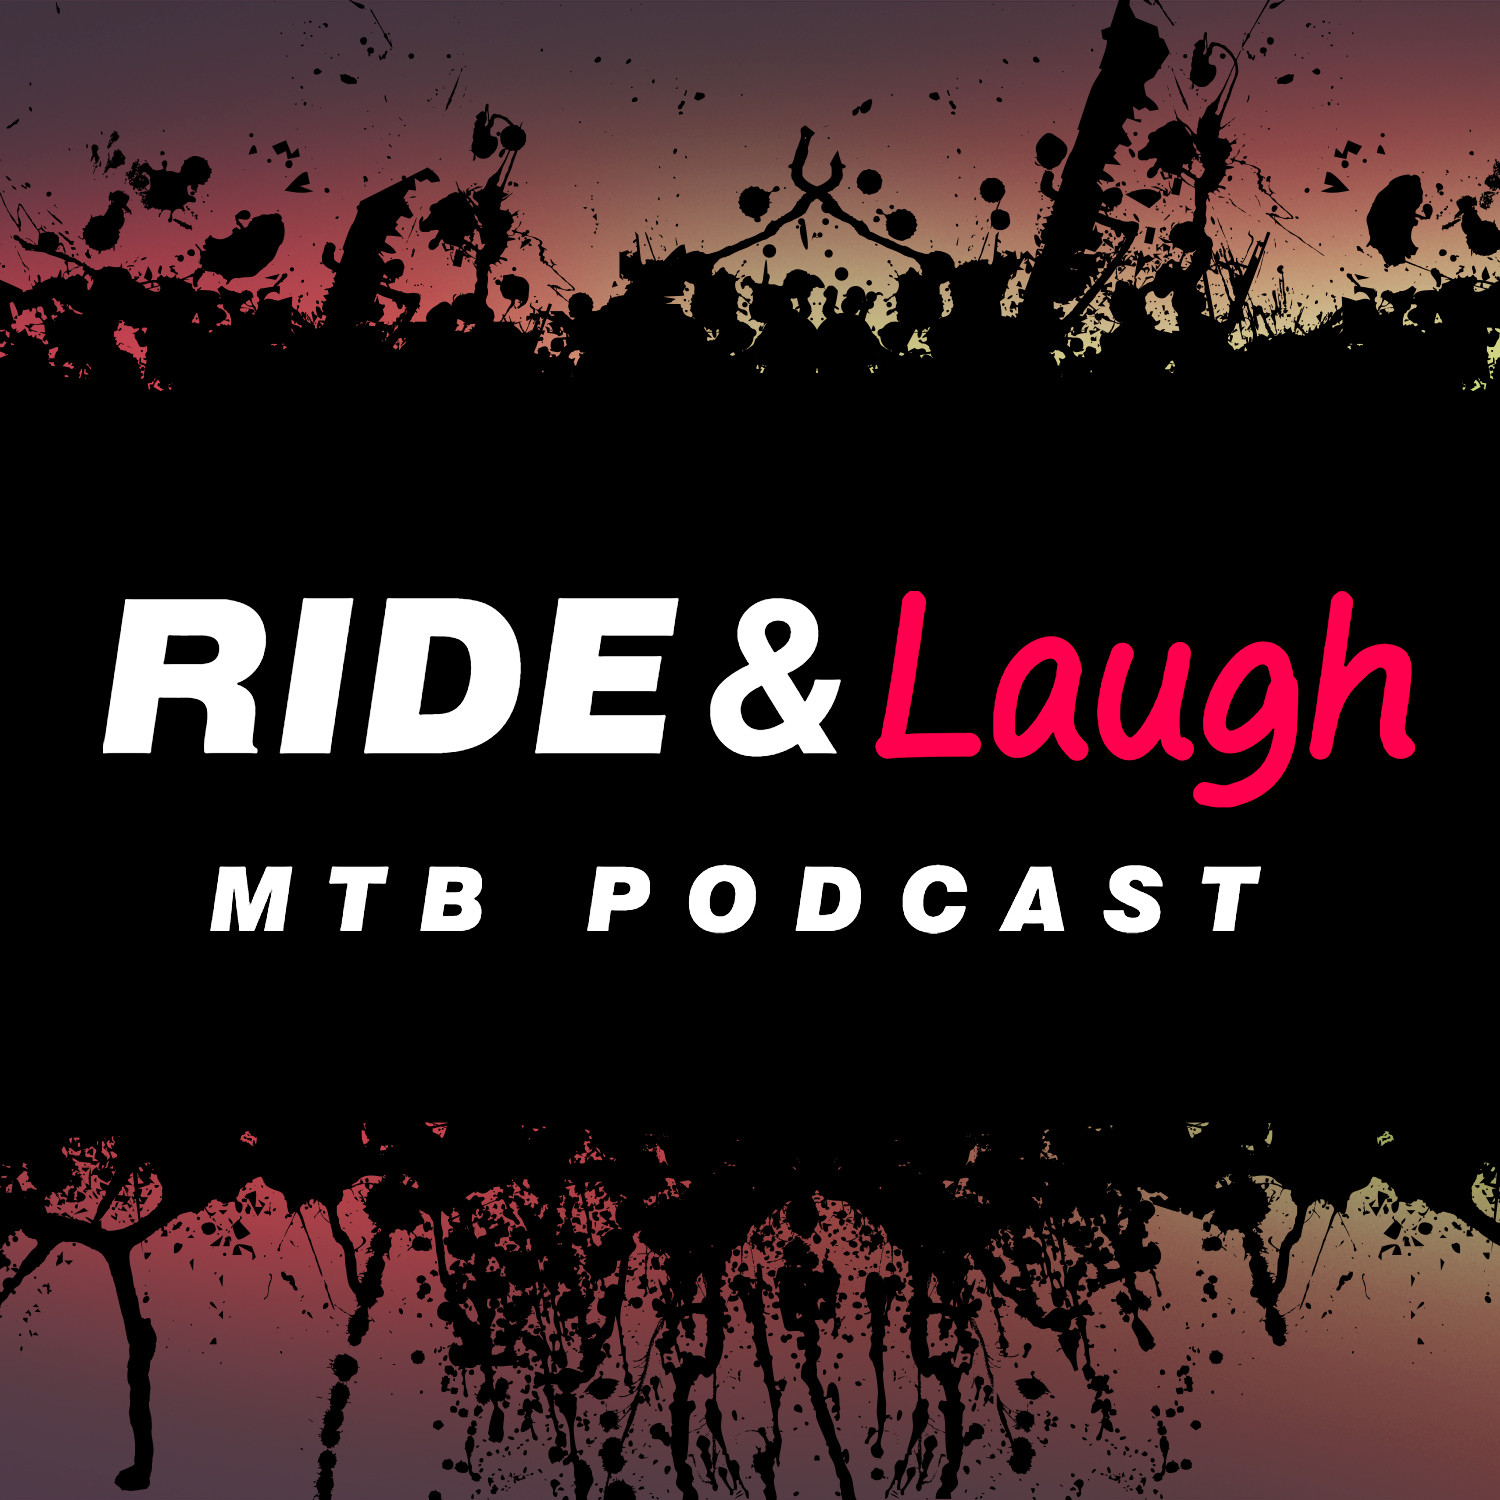 Ride and Laugh Mountain Bike Podcast